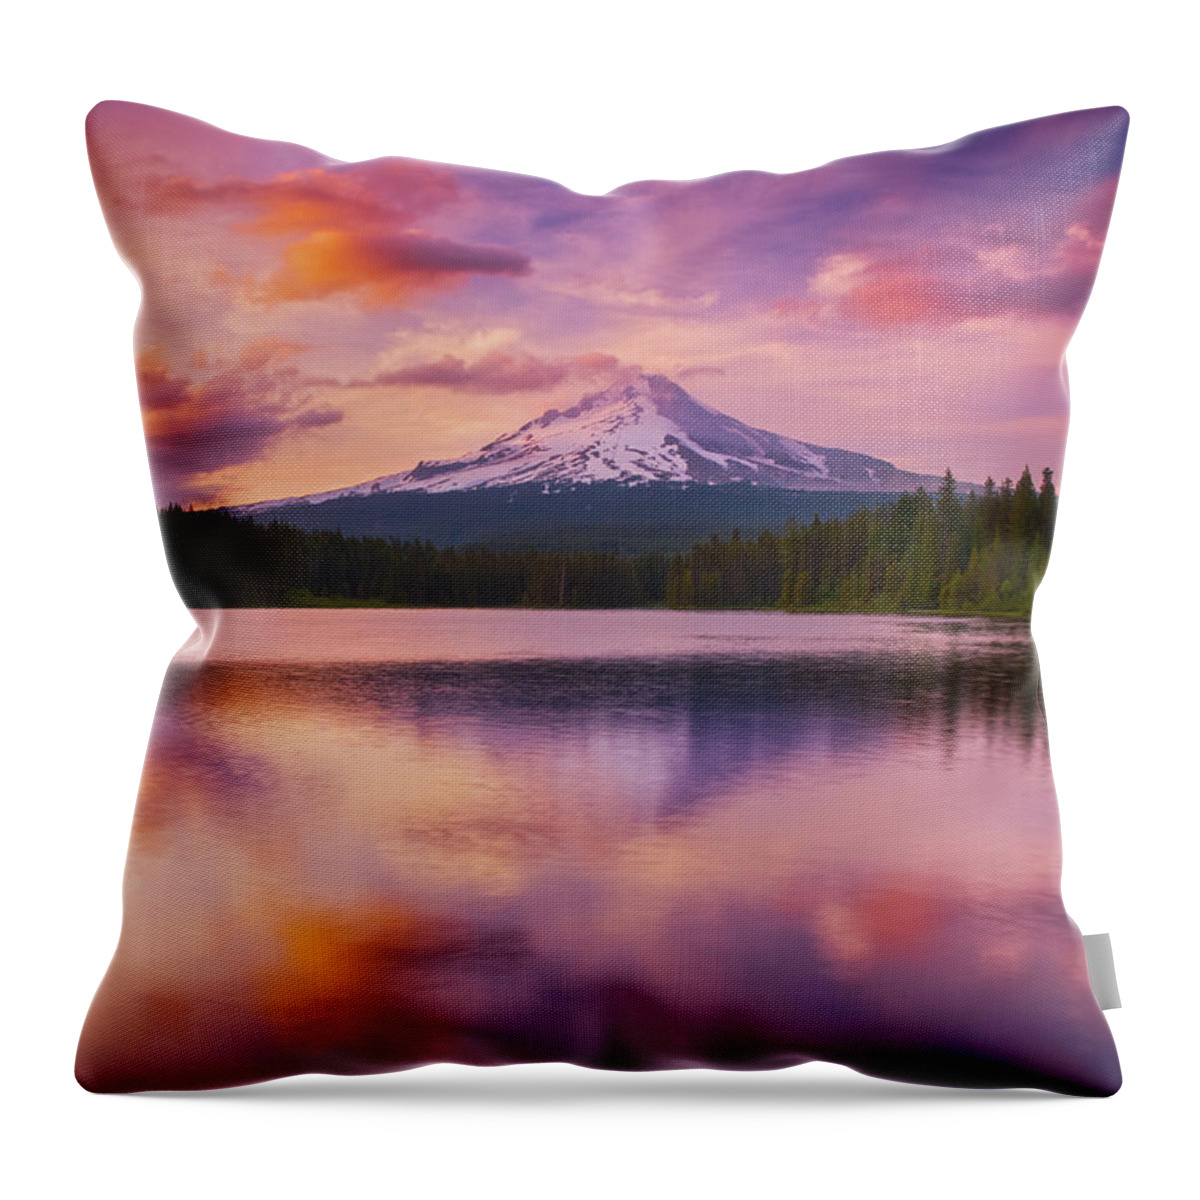 Sunset Throw Pillow featuring the photograph Trillium Lake Pastels by Darren White